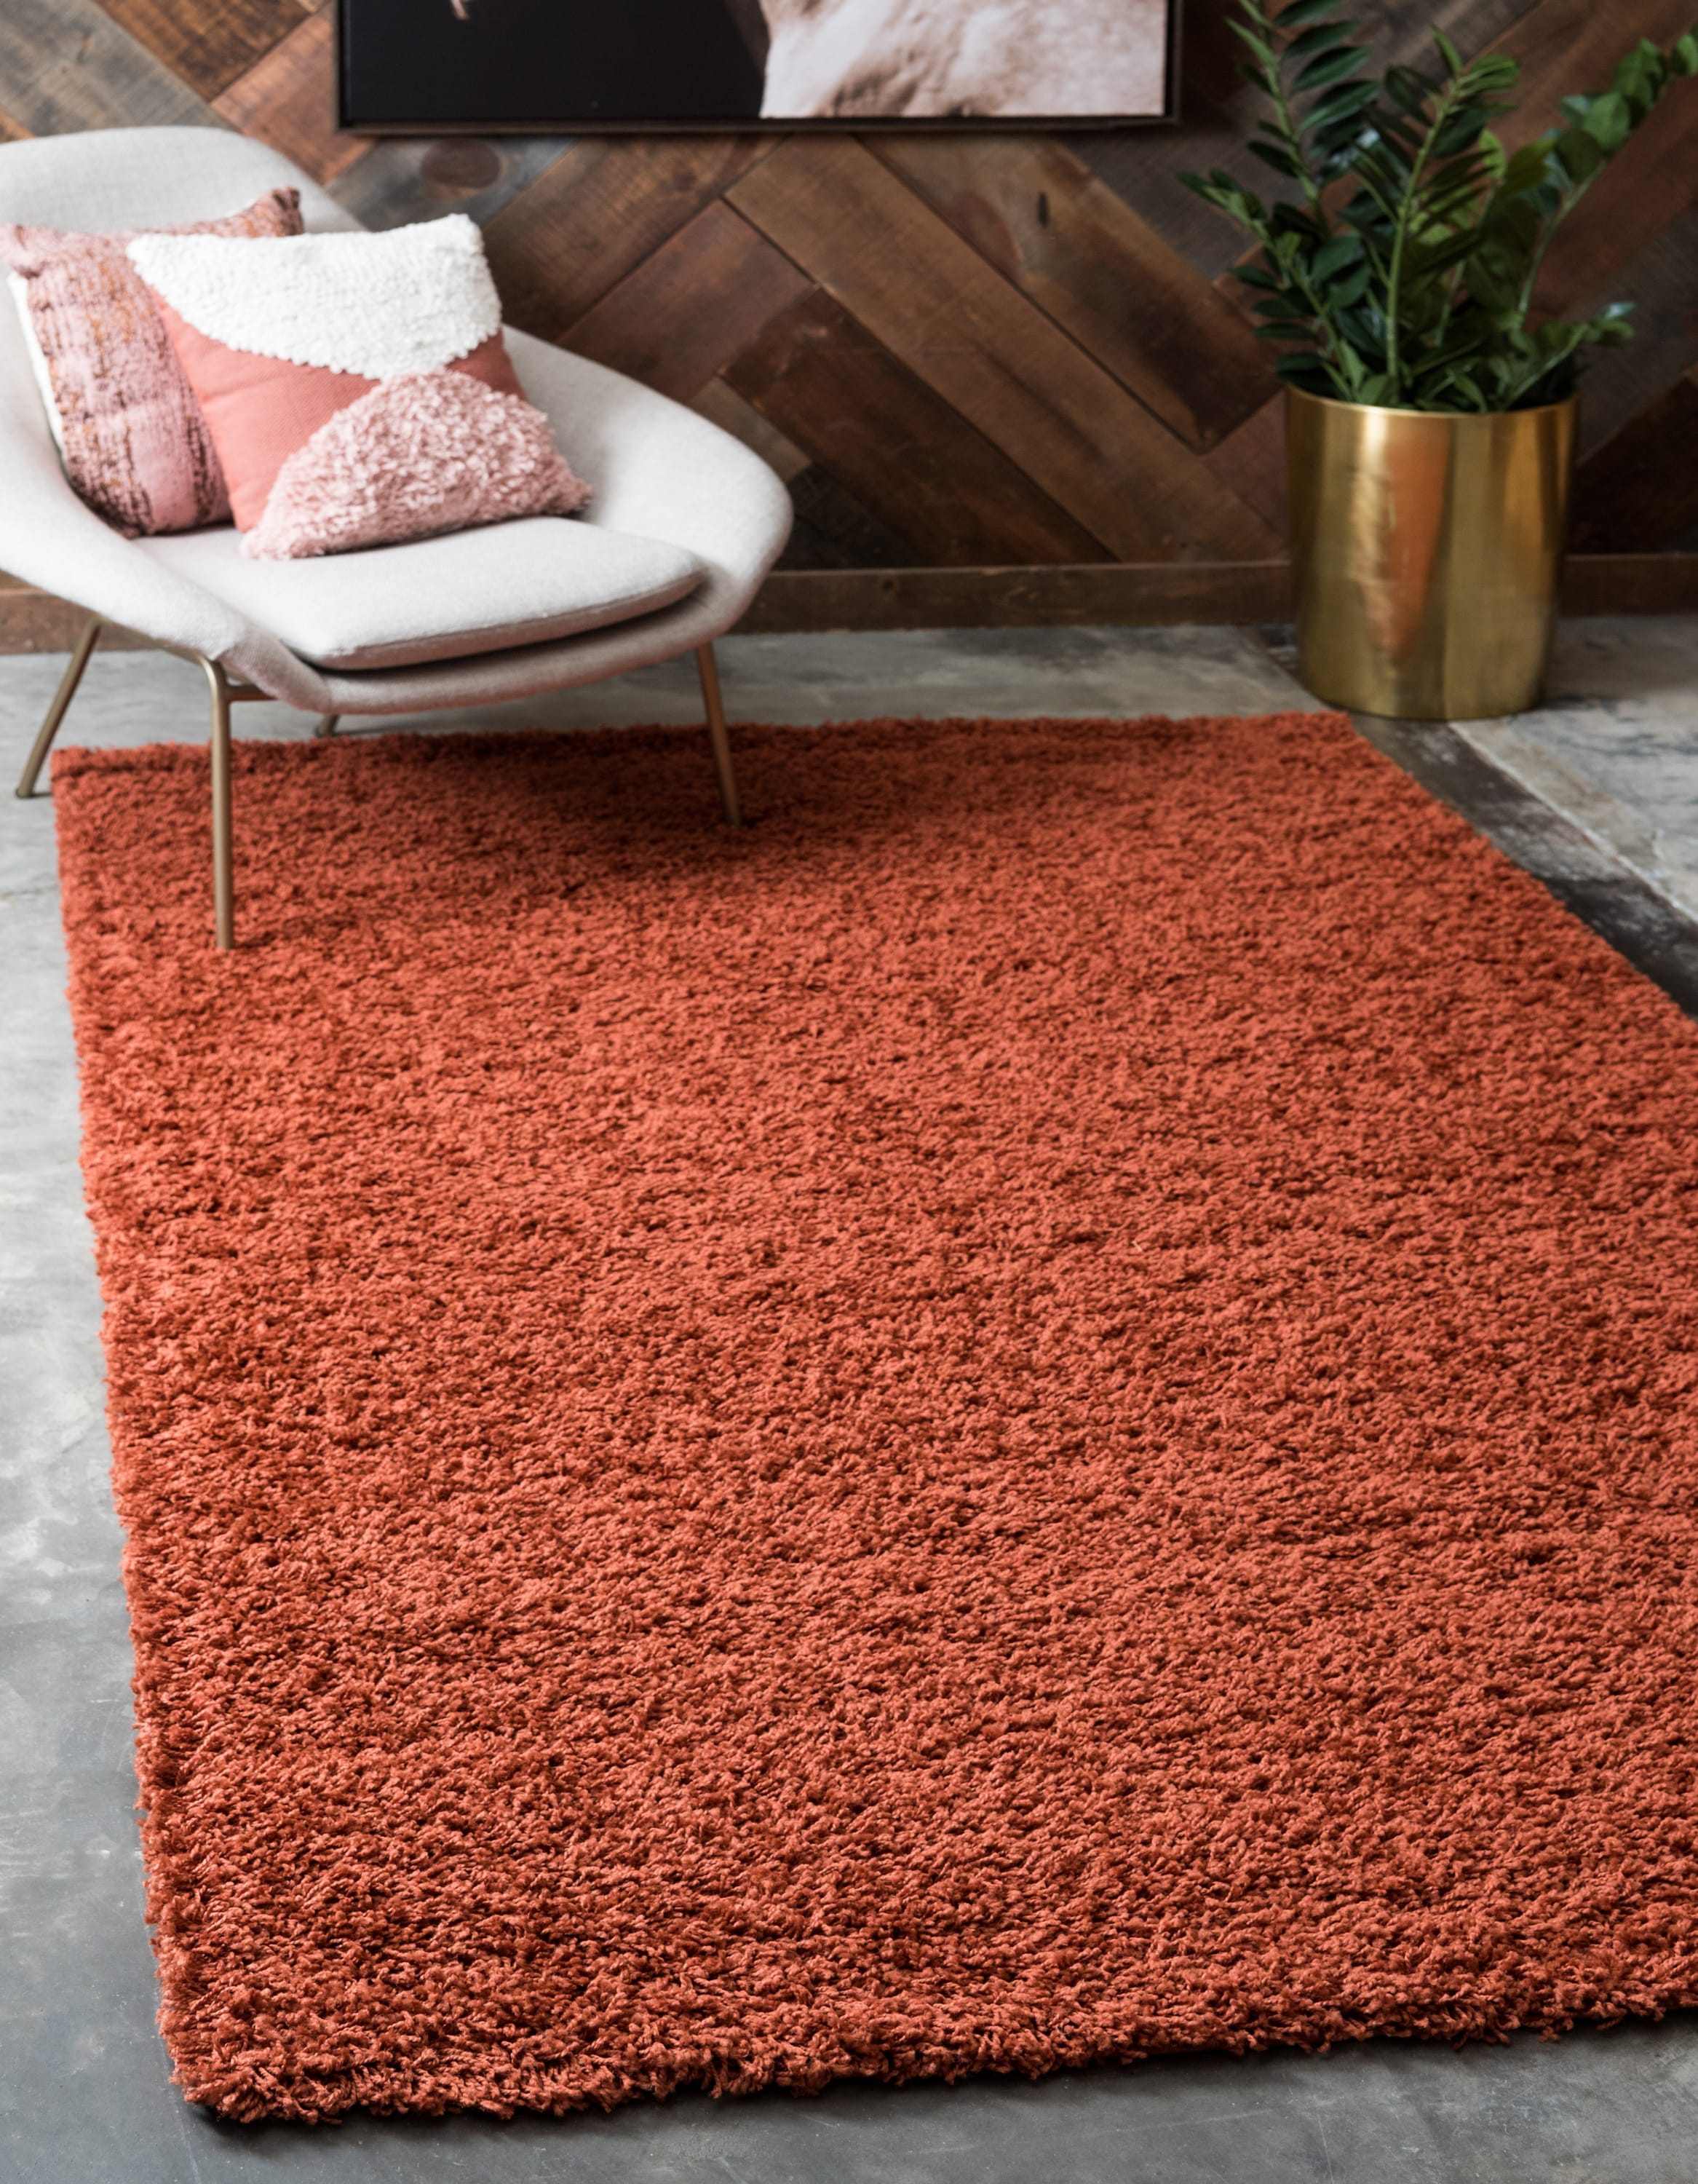 Large Thick Shaggy Rugs Terra Orange Soft Luxurious High Quality Bedroom  Carpet